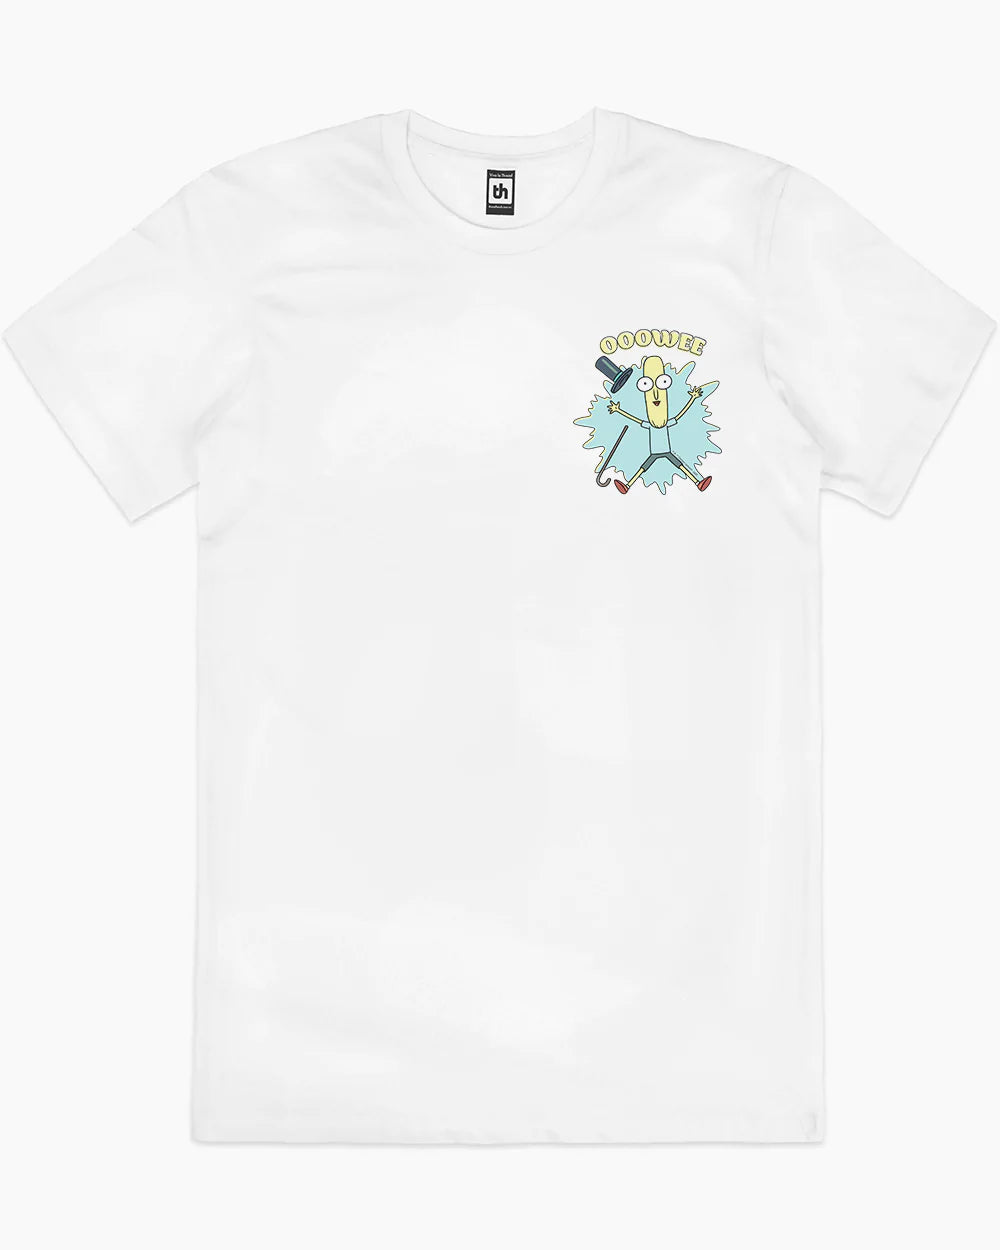 Mr Poopy Butthole T-Shirt Europe Online #colour_white